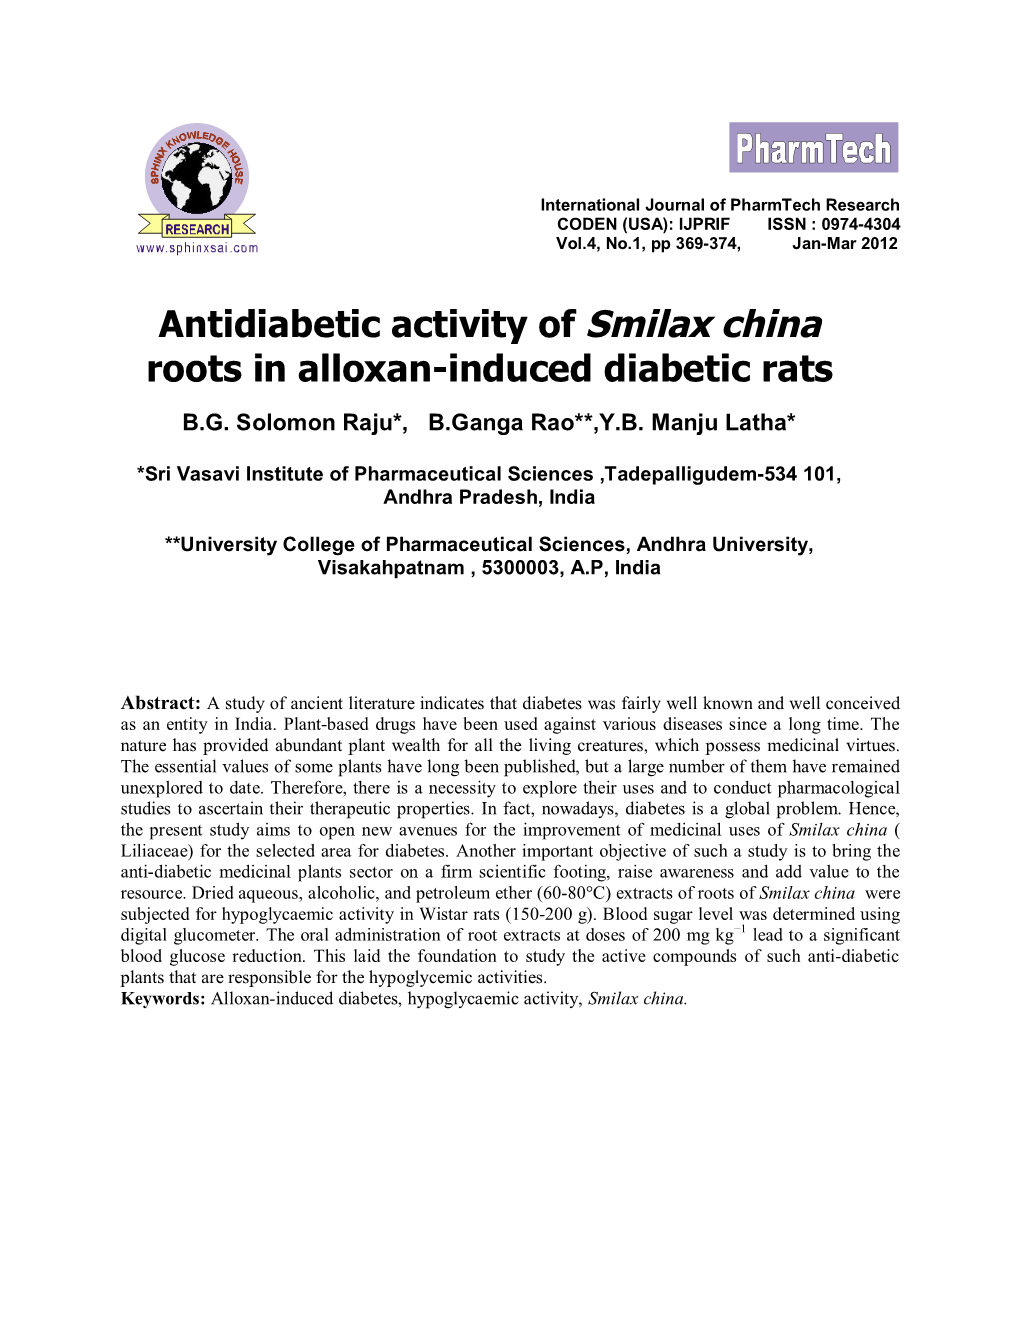 Antidiabetic Activity of Smilax China Roots in Alloxan-Induced Diabetic Rats B.G